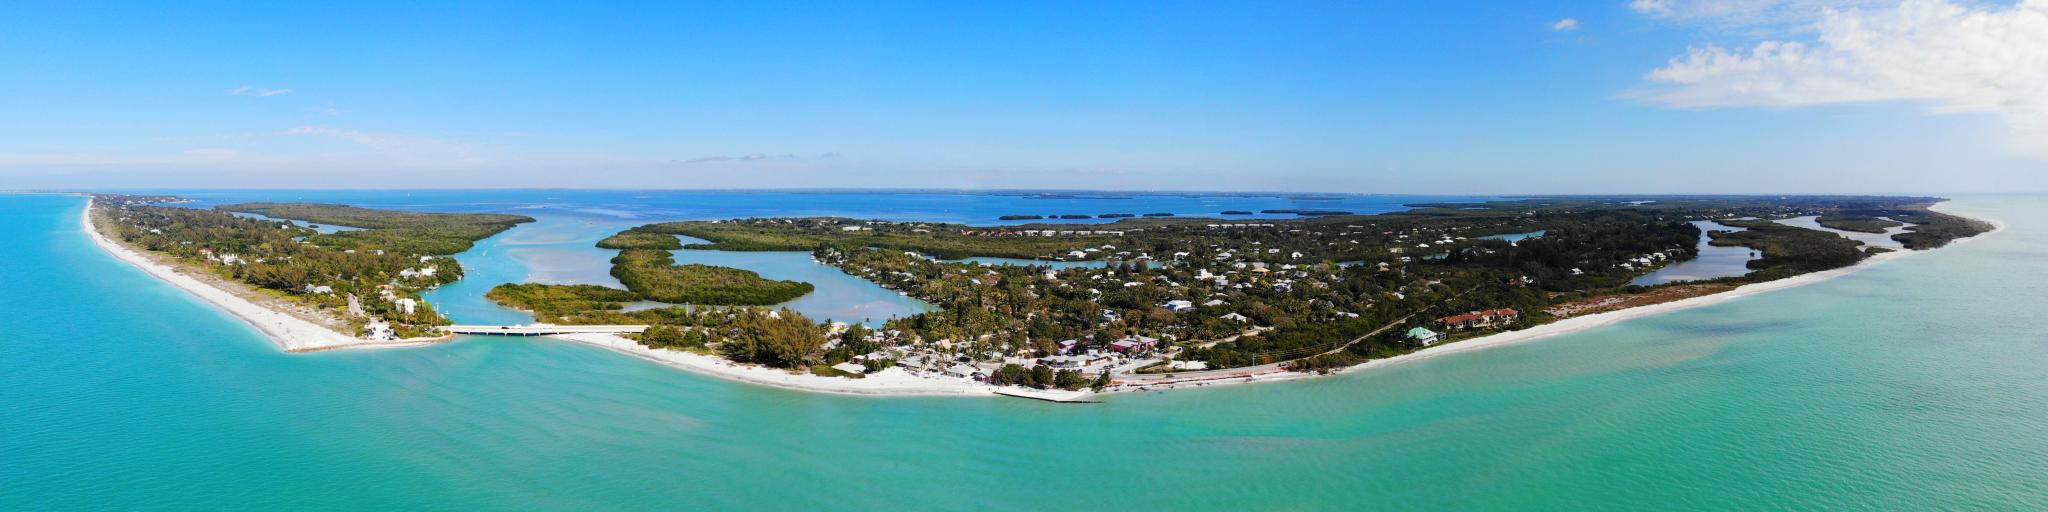 Aerial landscape view of Captiva Island and Sanibel Island in Lee County, Florida, United States